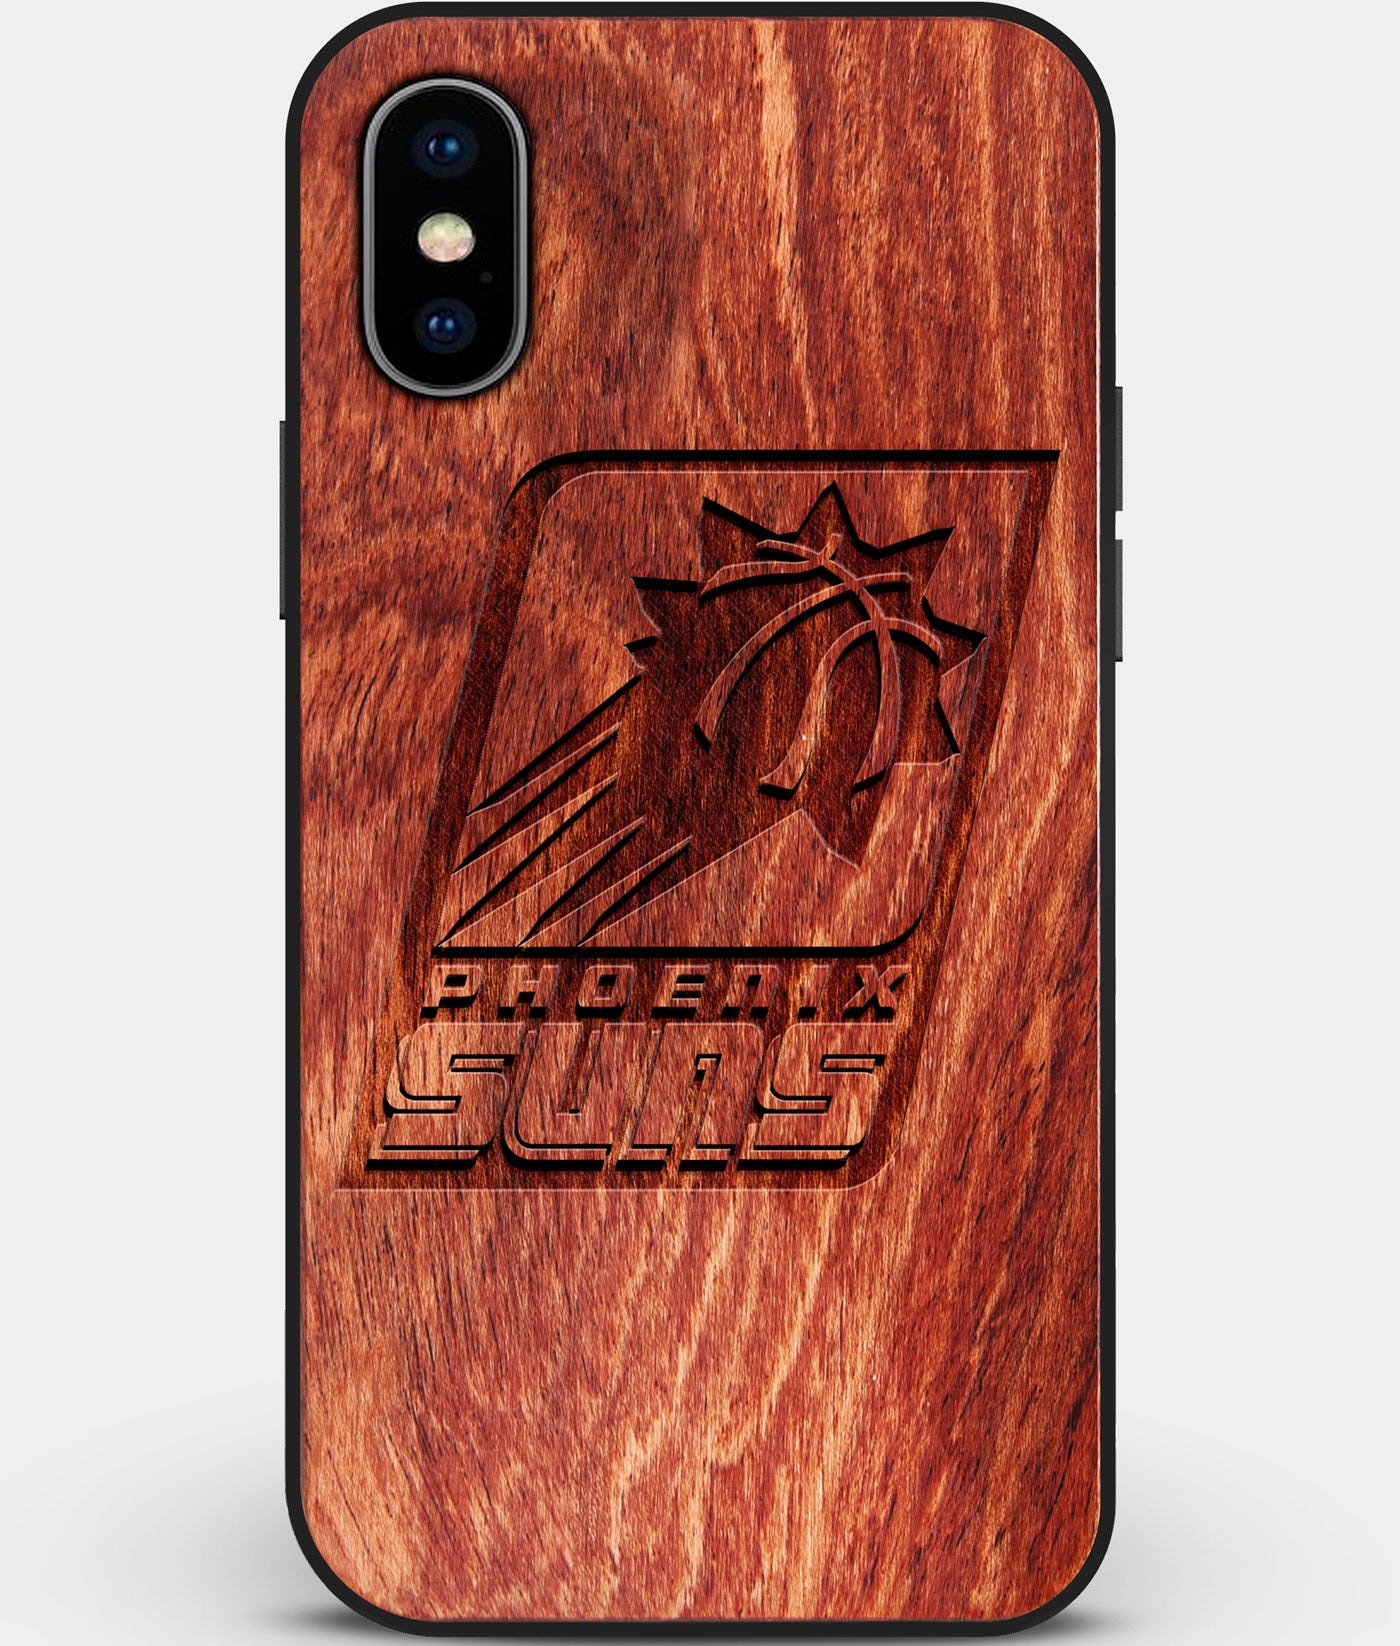 Custom Carved Wood Phoenix Suns iPhone X/XS Case | Personalized Mahogany Wood Phoenix Suns Cover, Birthday Gift, Gifts For Him, Monogrammed Gift For Fan | by Engraved In Nature